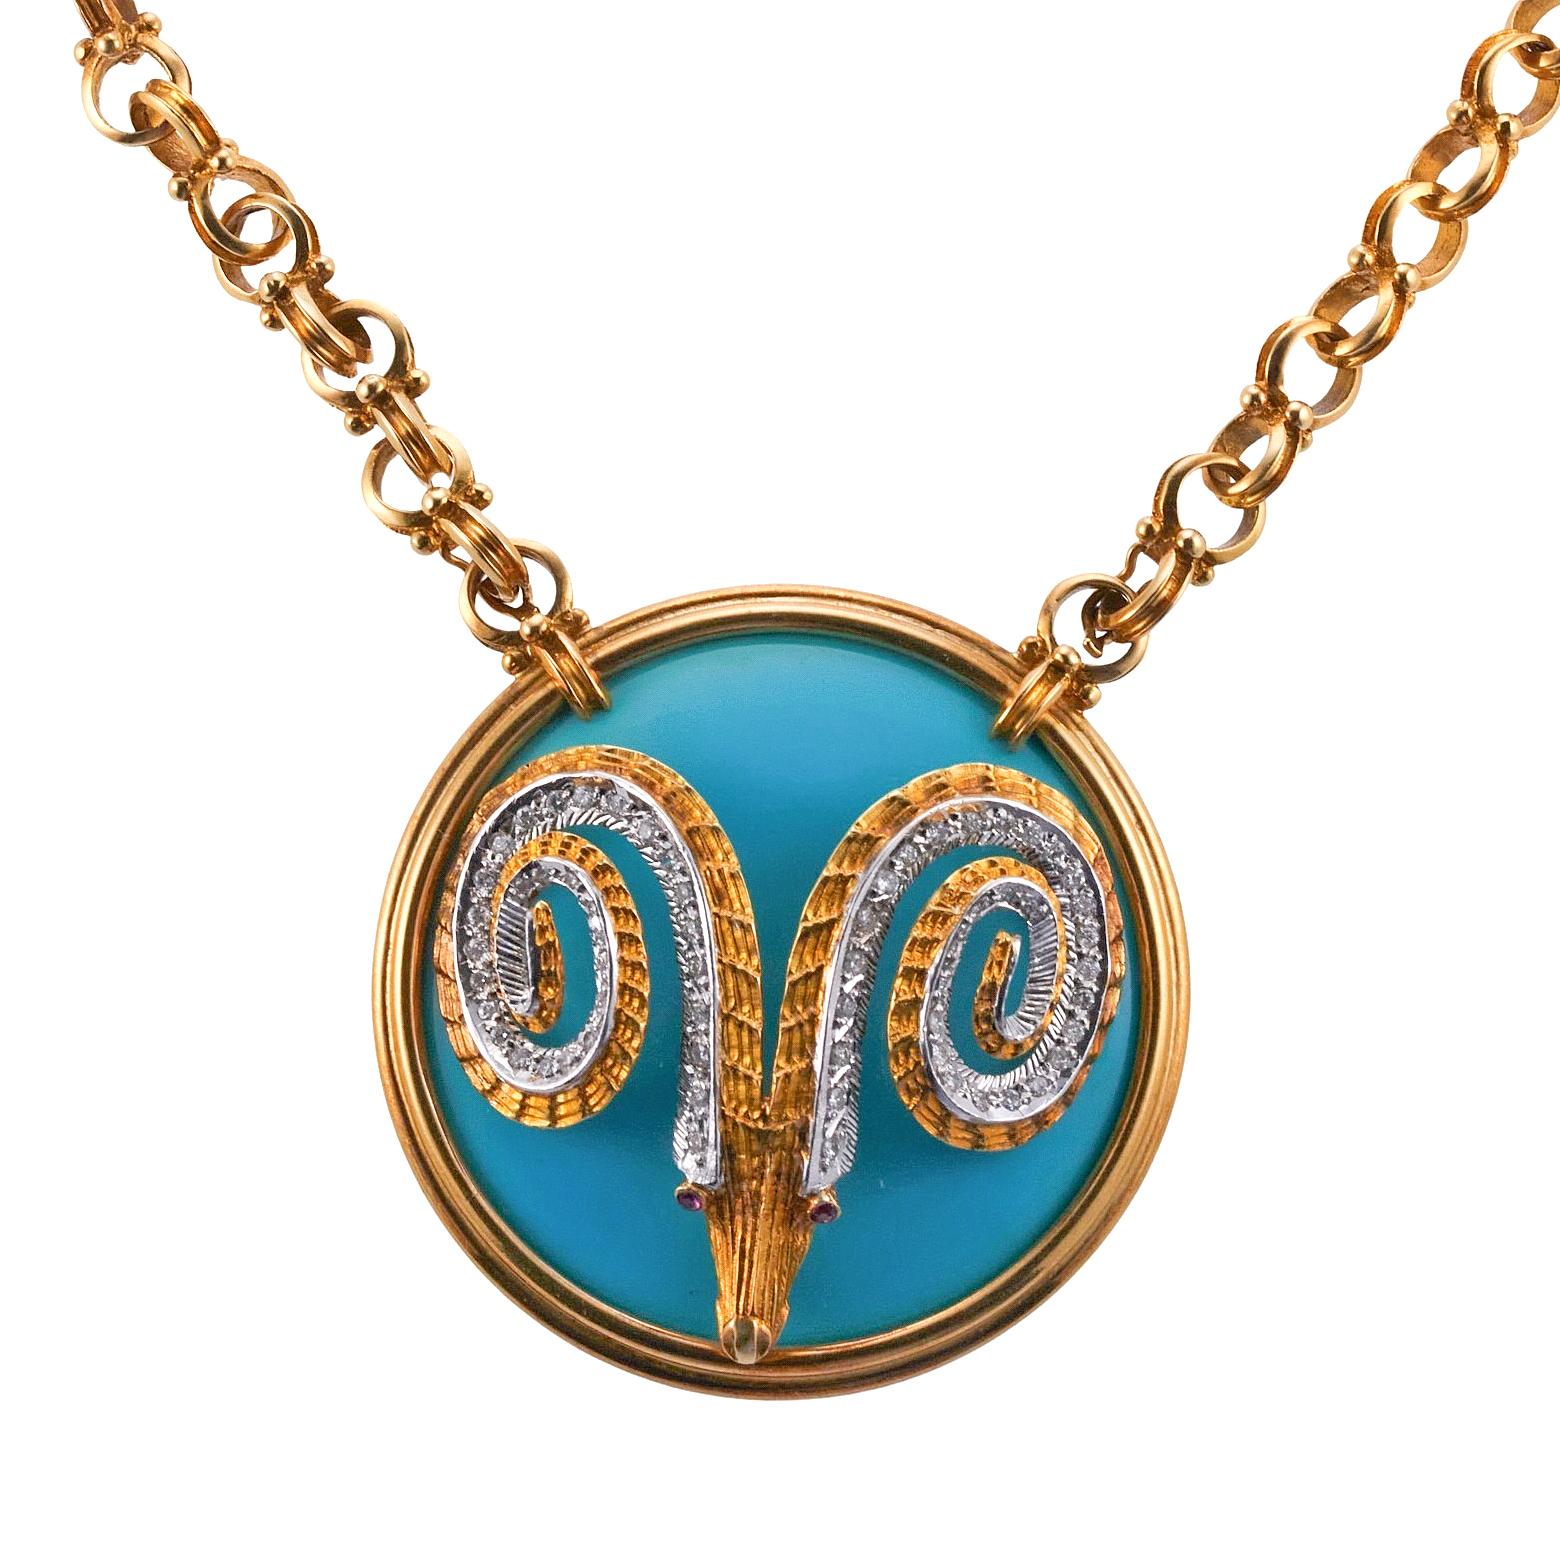 18K yellow gold pendant necklace, Greek made, set with turquoise and approx. 0.70ctw in SI/H diamonds. Necklace can be worn without the dendant, it's detachable. Necklace measures 28